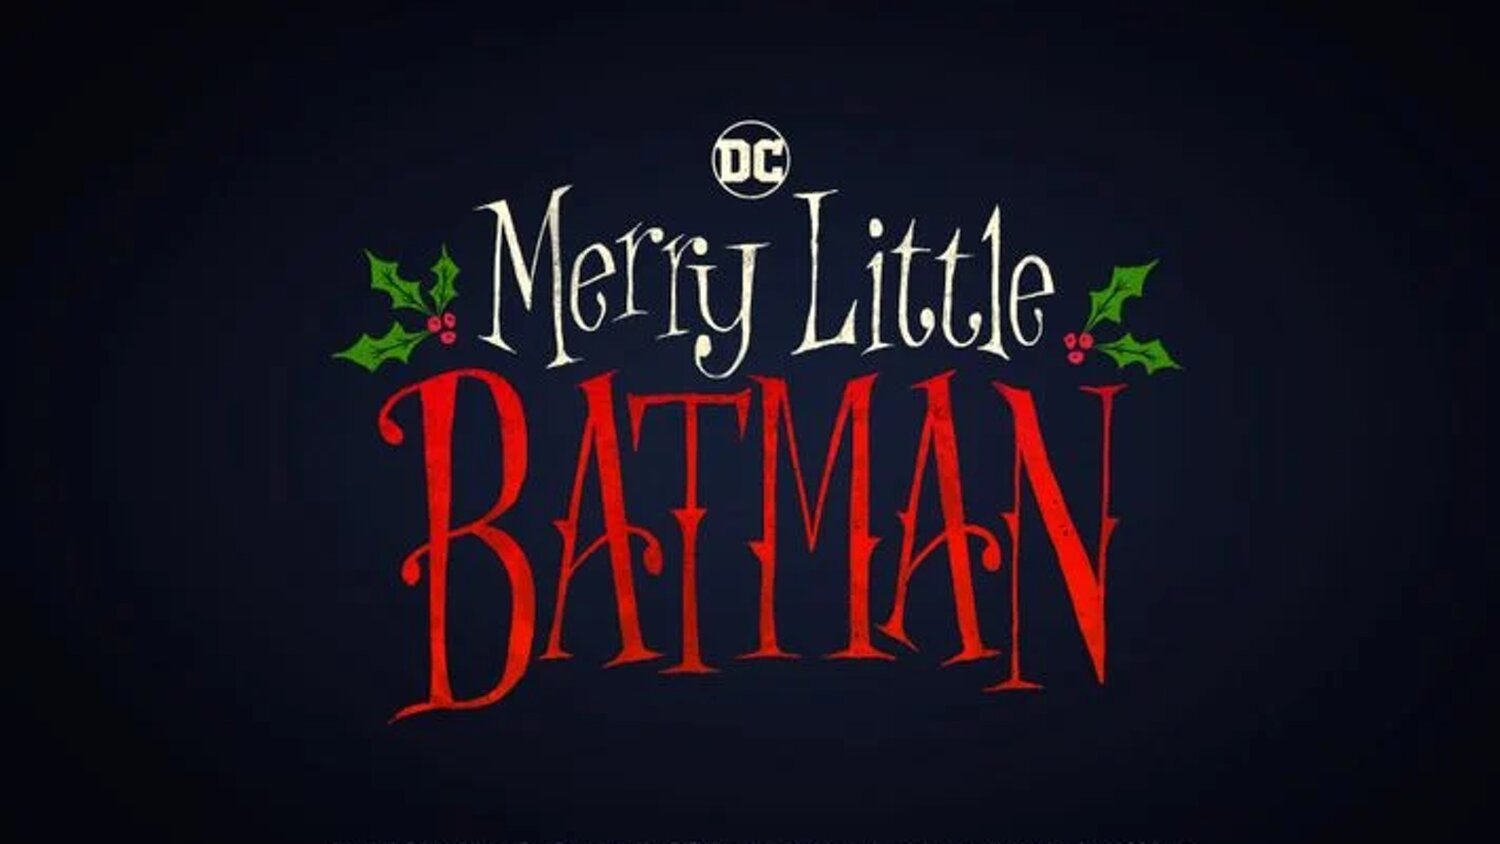 MERRY LITTLE BATMAN Holiday Animated Movie Announced By DC